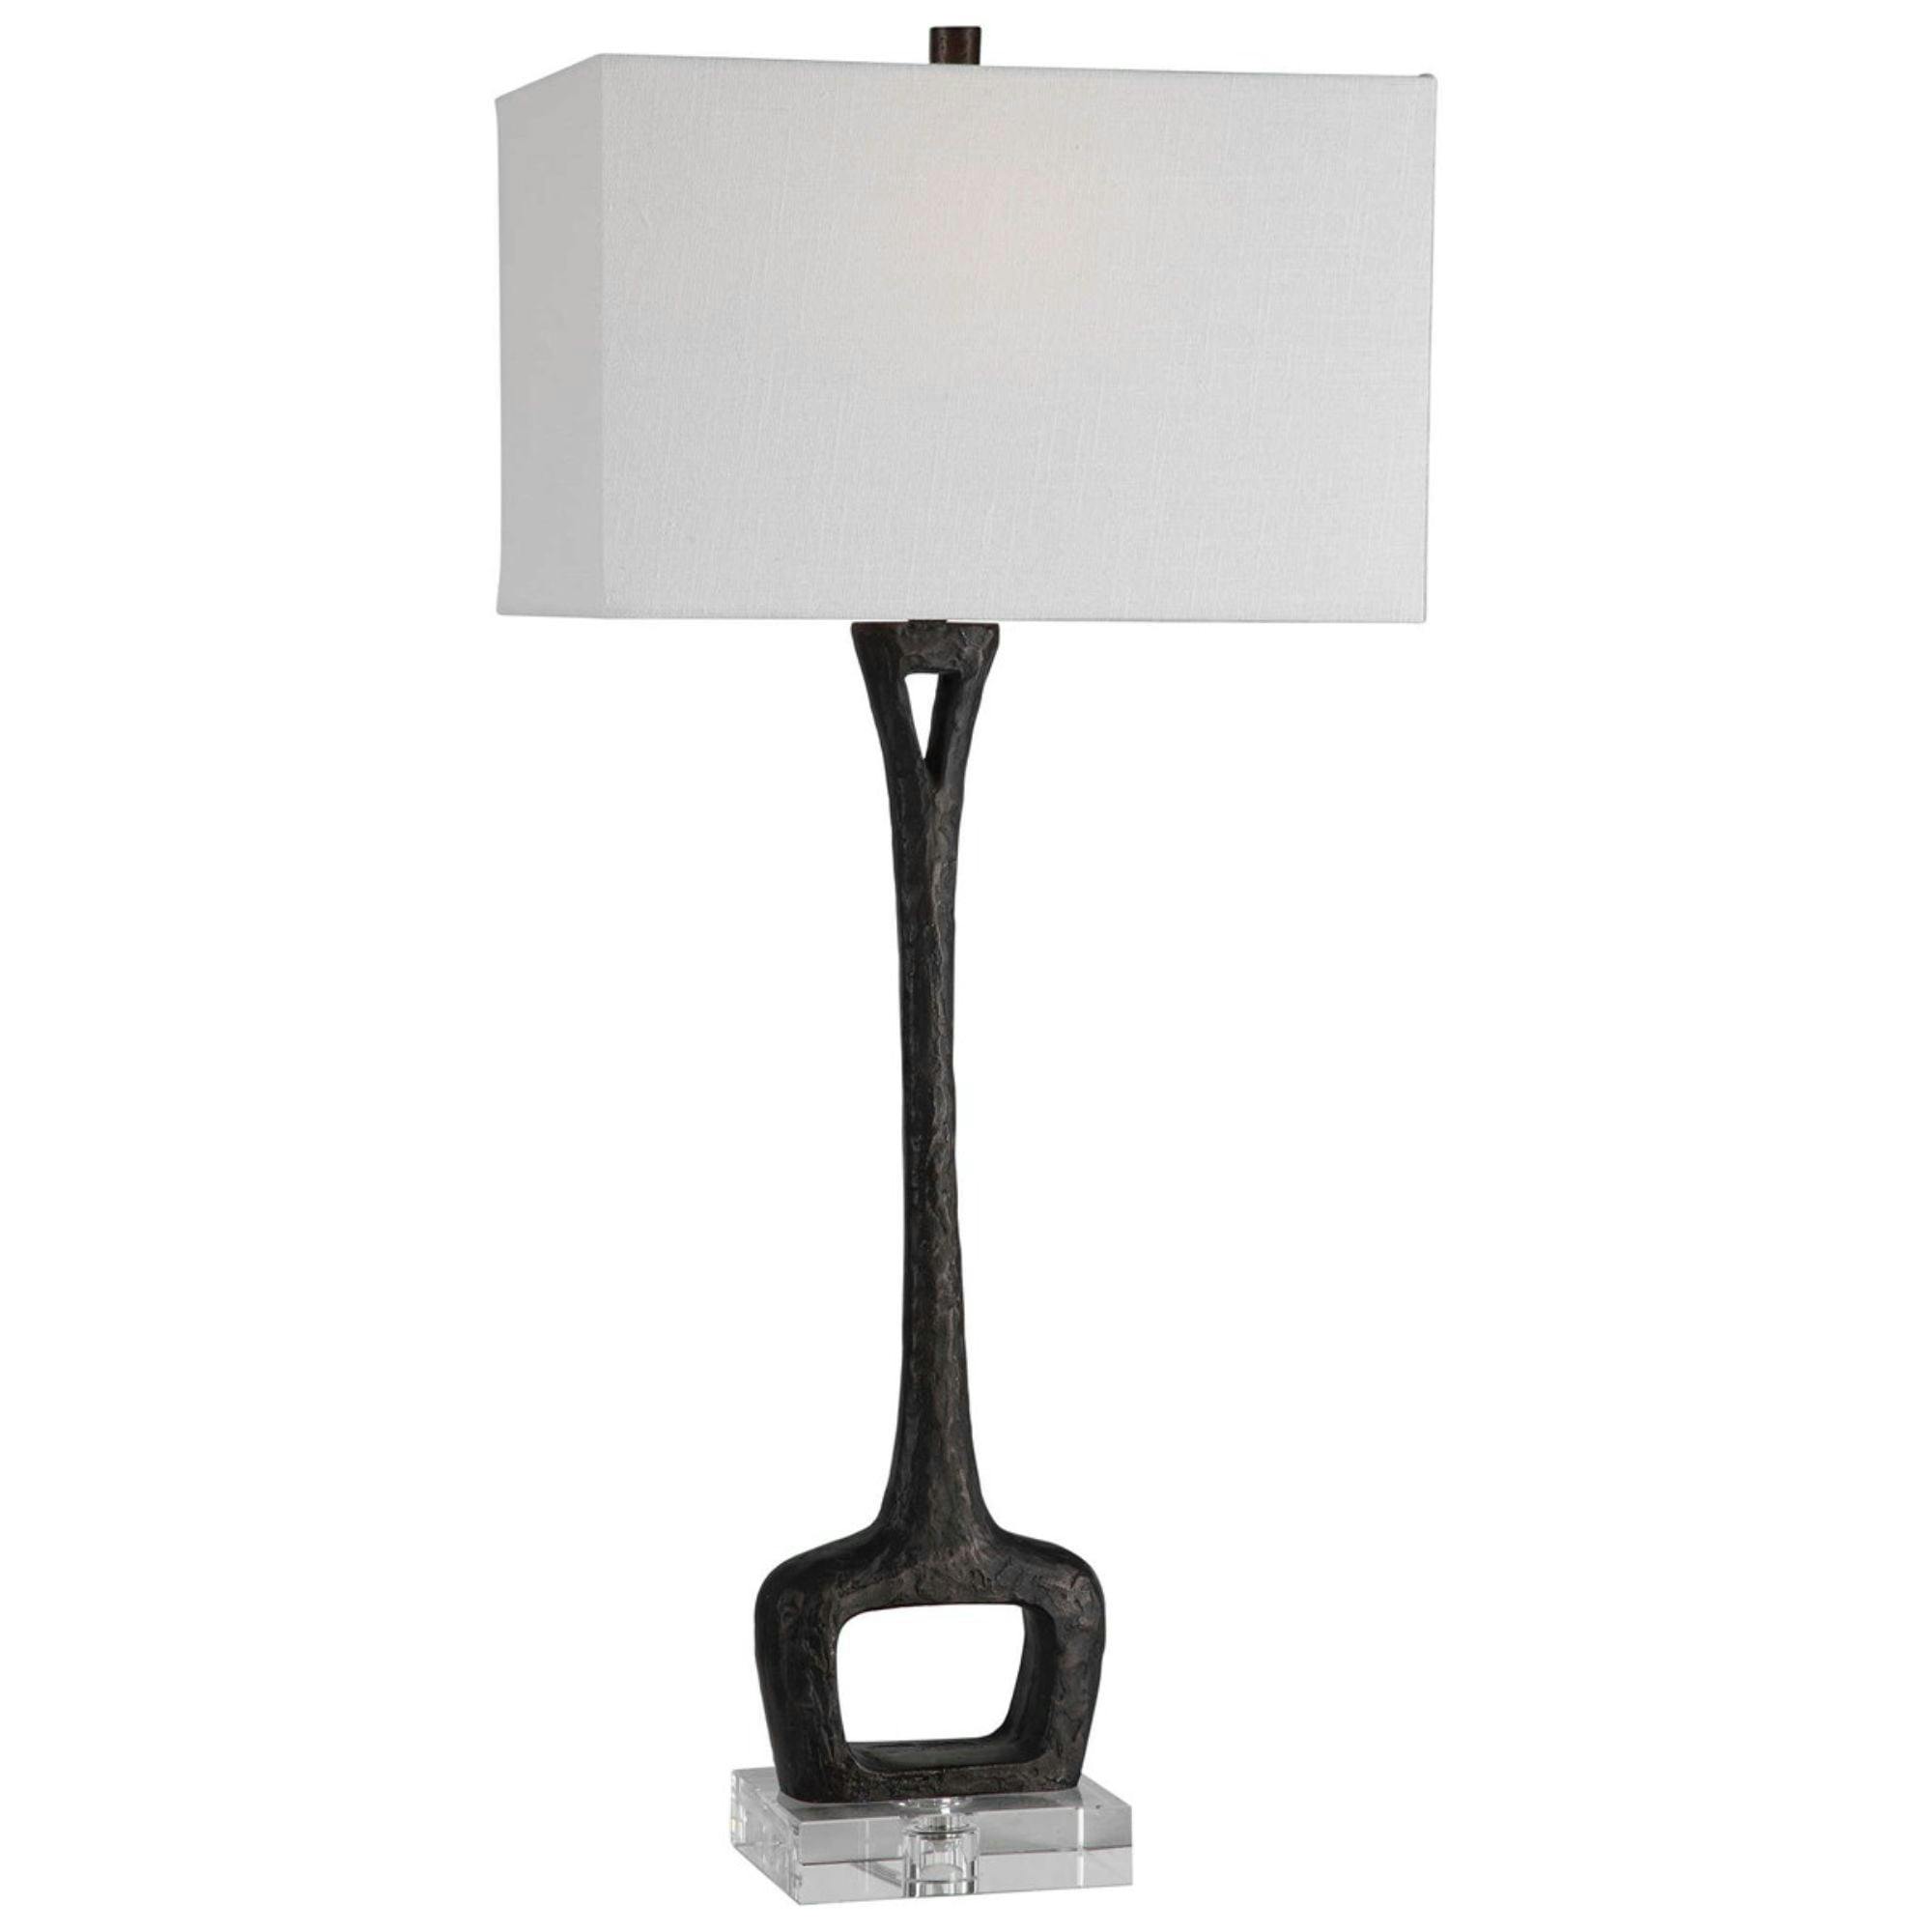 Aged Black Cast Iron Table Lamp with White Linen Shade